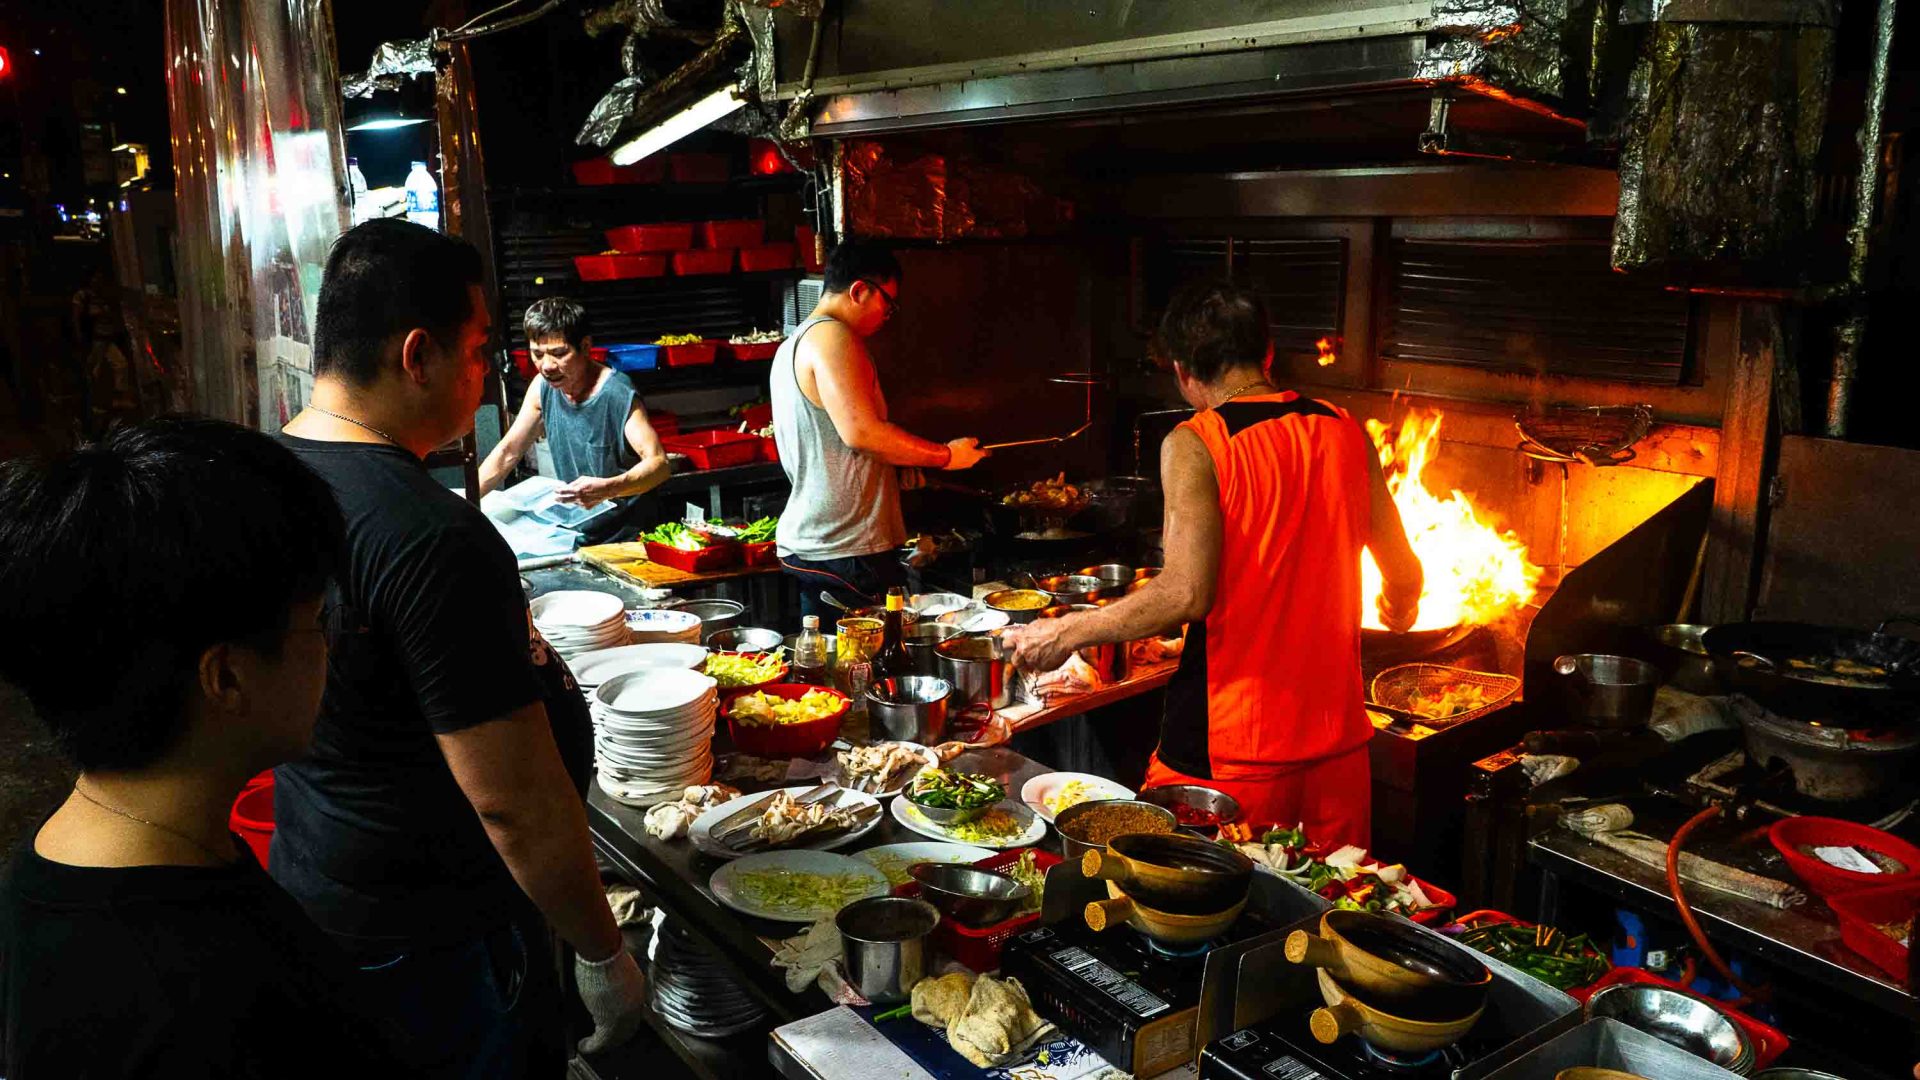 Chefs prepare food in a crowded outdoors kitchen.